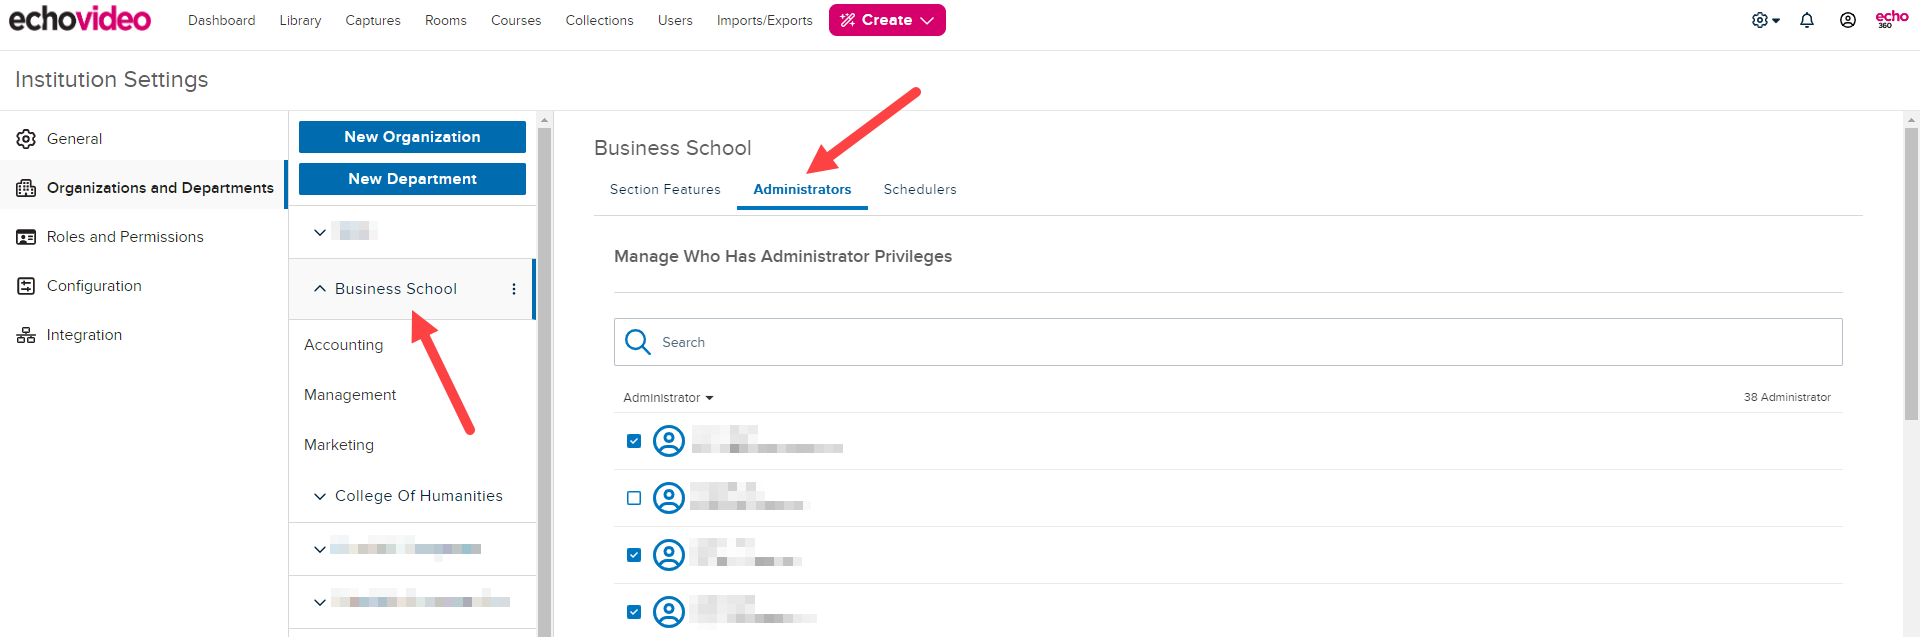 Institution settings page with Organization selected and showing Administrators list for that level as described